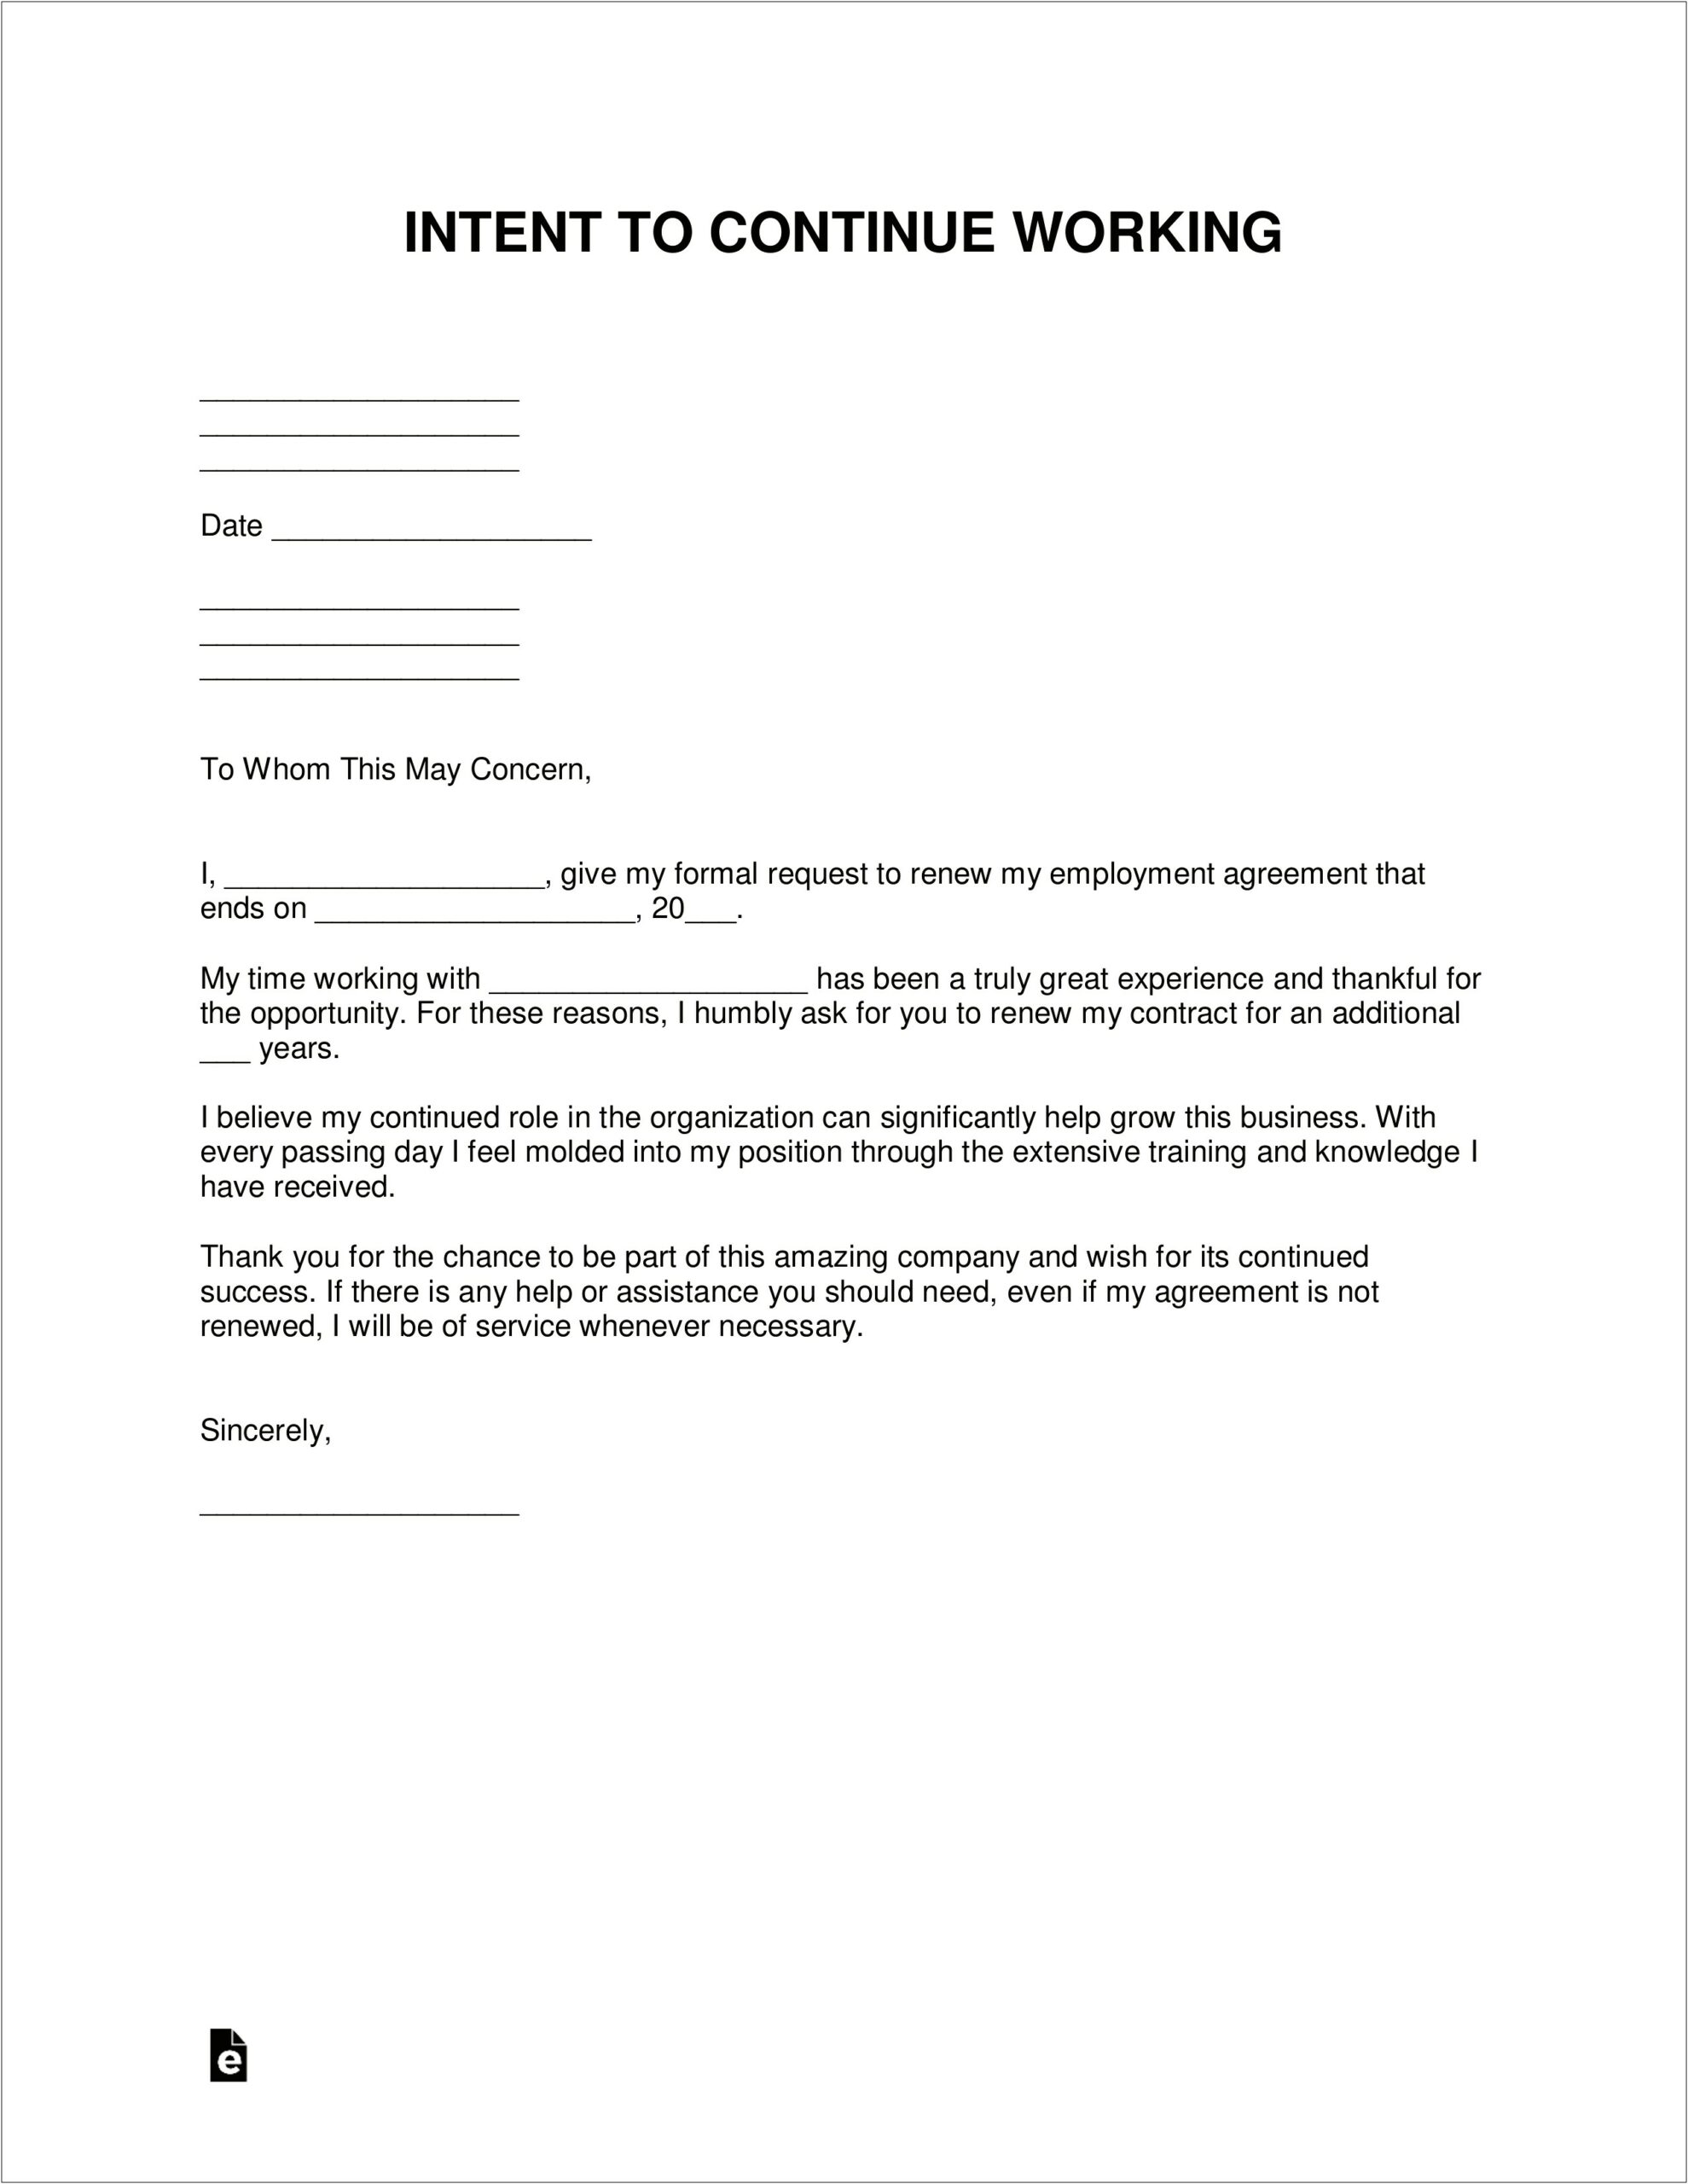 Job Contract Renewal Letter Resume